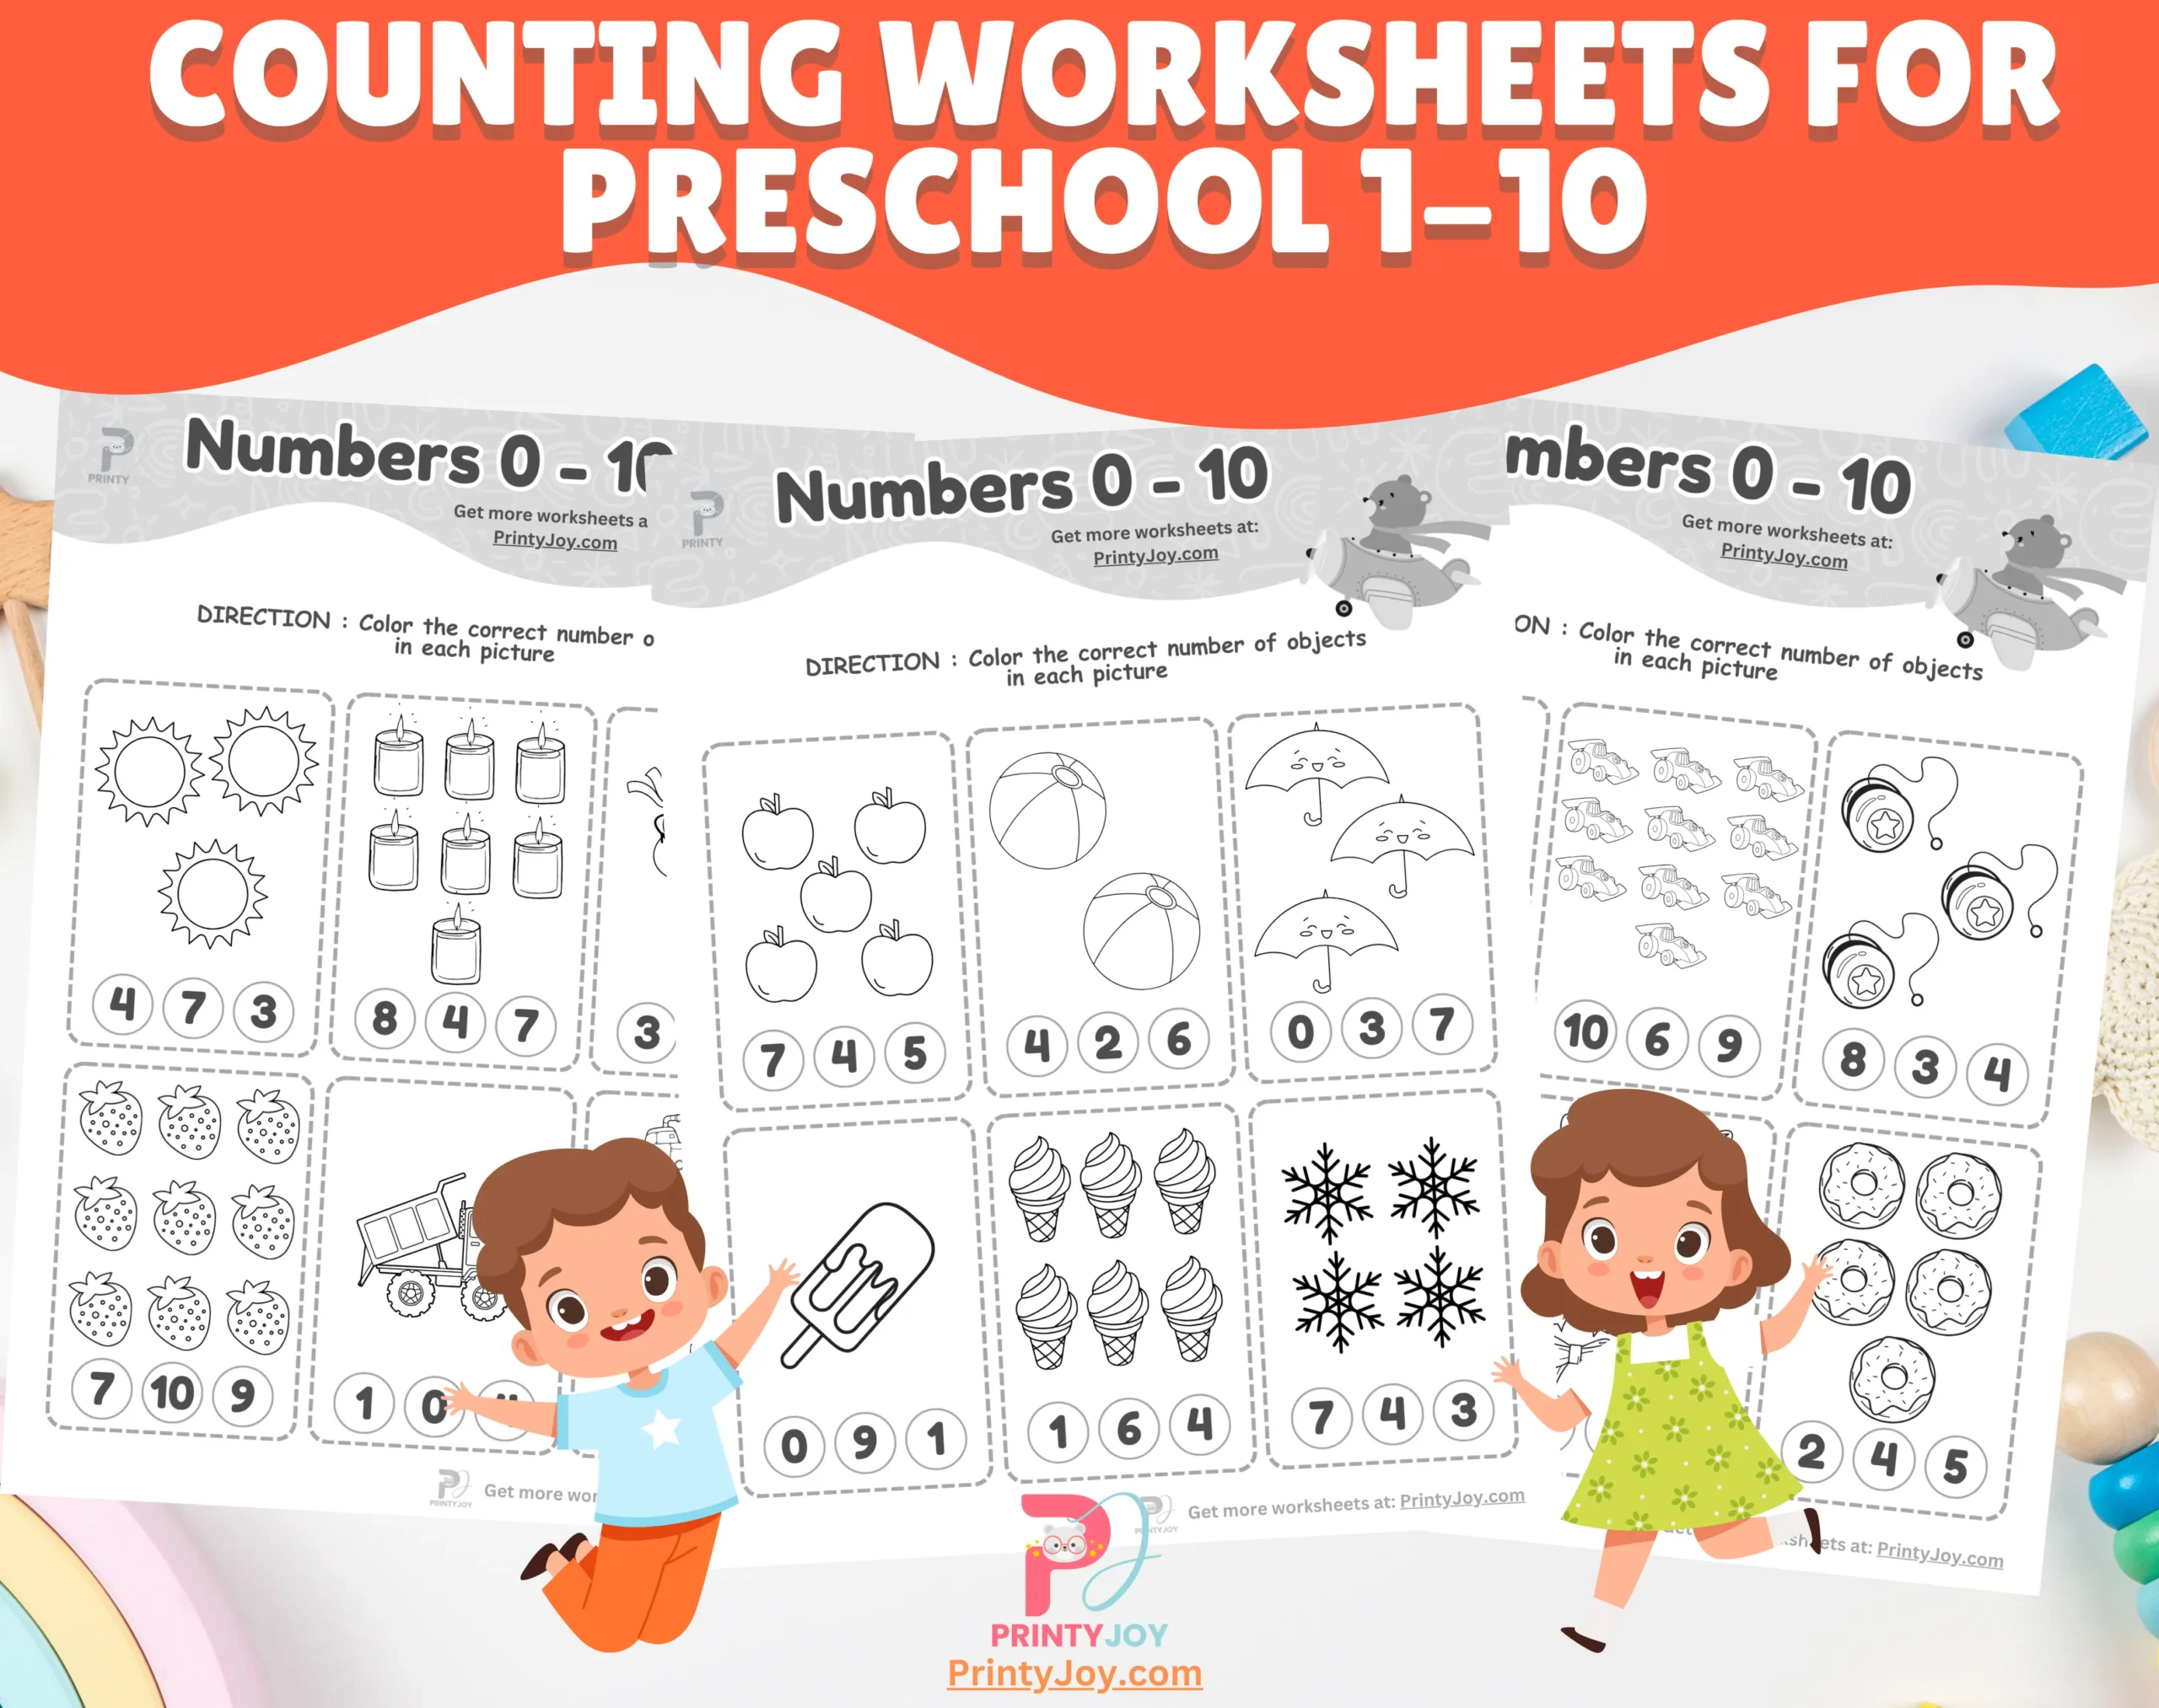 Counting Worksheets For Preschool 1-10